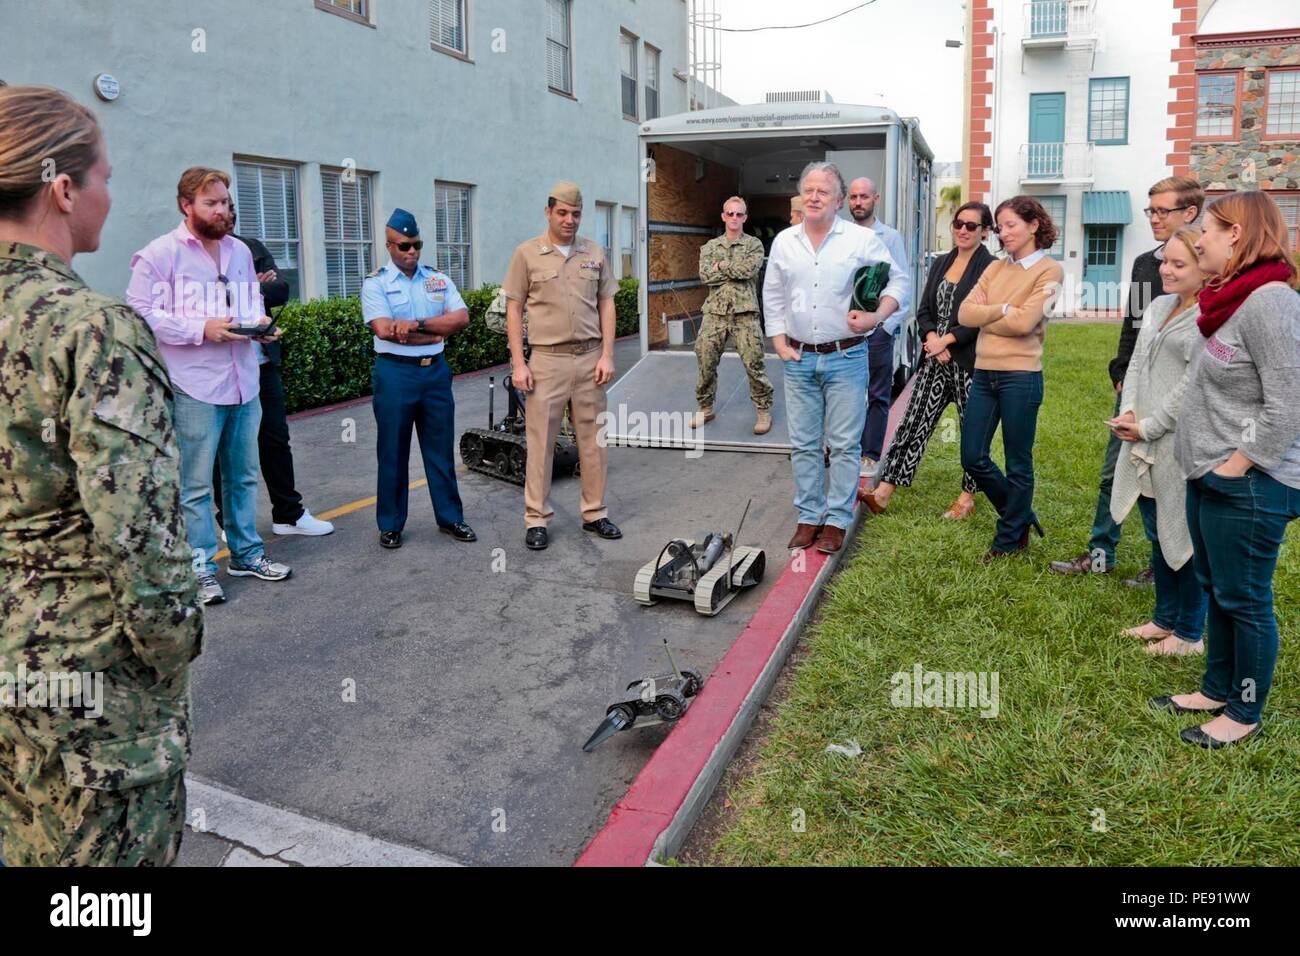 151104-N-HP195-168 LOS ANGELES -- Shane Brennan, center right, executive producer on 'NCIS: Los Angeles', expresses his appreciation for a Navy Explosive Ordnance Disposal demonstration on the back lot at Paramount Pictures in Hollywood. Brennan and other members of the show's writing staff hinted that the technology demonstration provided by EOD Mobile Unit Eleven could inform future episodes of 'NCIS: Los Angeles'. The meeting was coordinated by the Navy Office of Information West (NAVINFOWEST), which provides production assistance to entertainment industry professionals and helps them becom Stock Photo